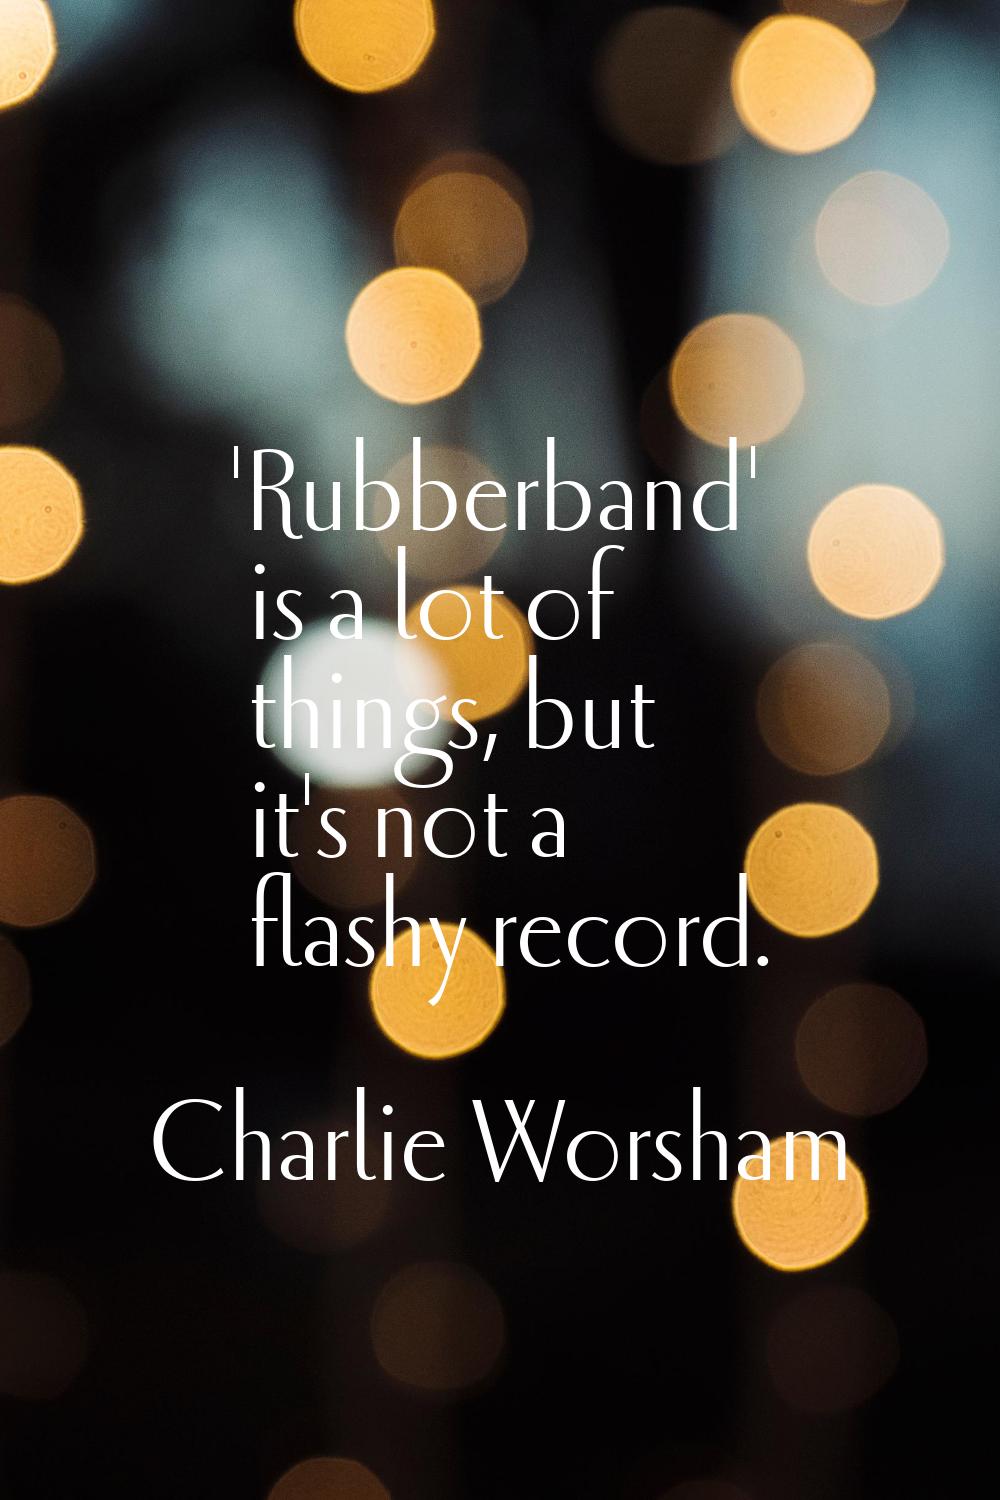 'Rubberband' is a lot of things, but it's not a flashy record.